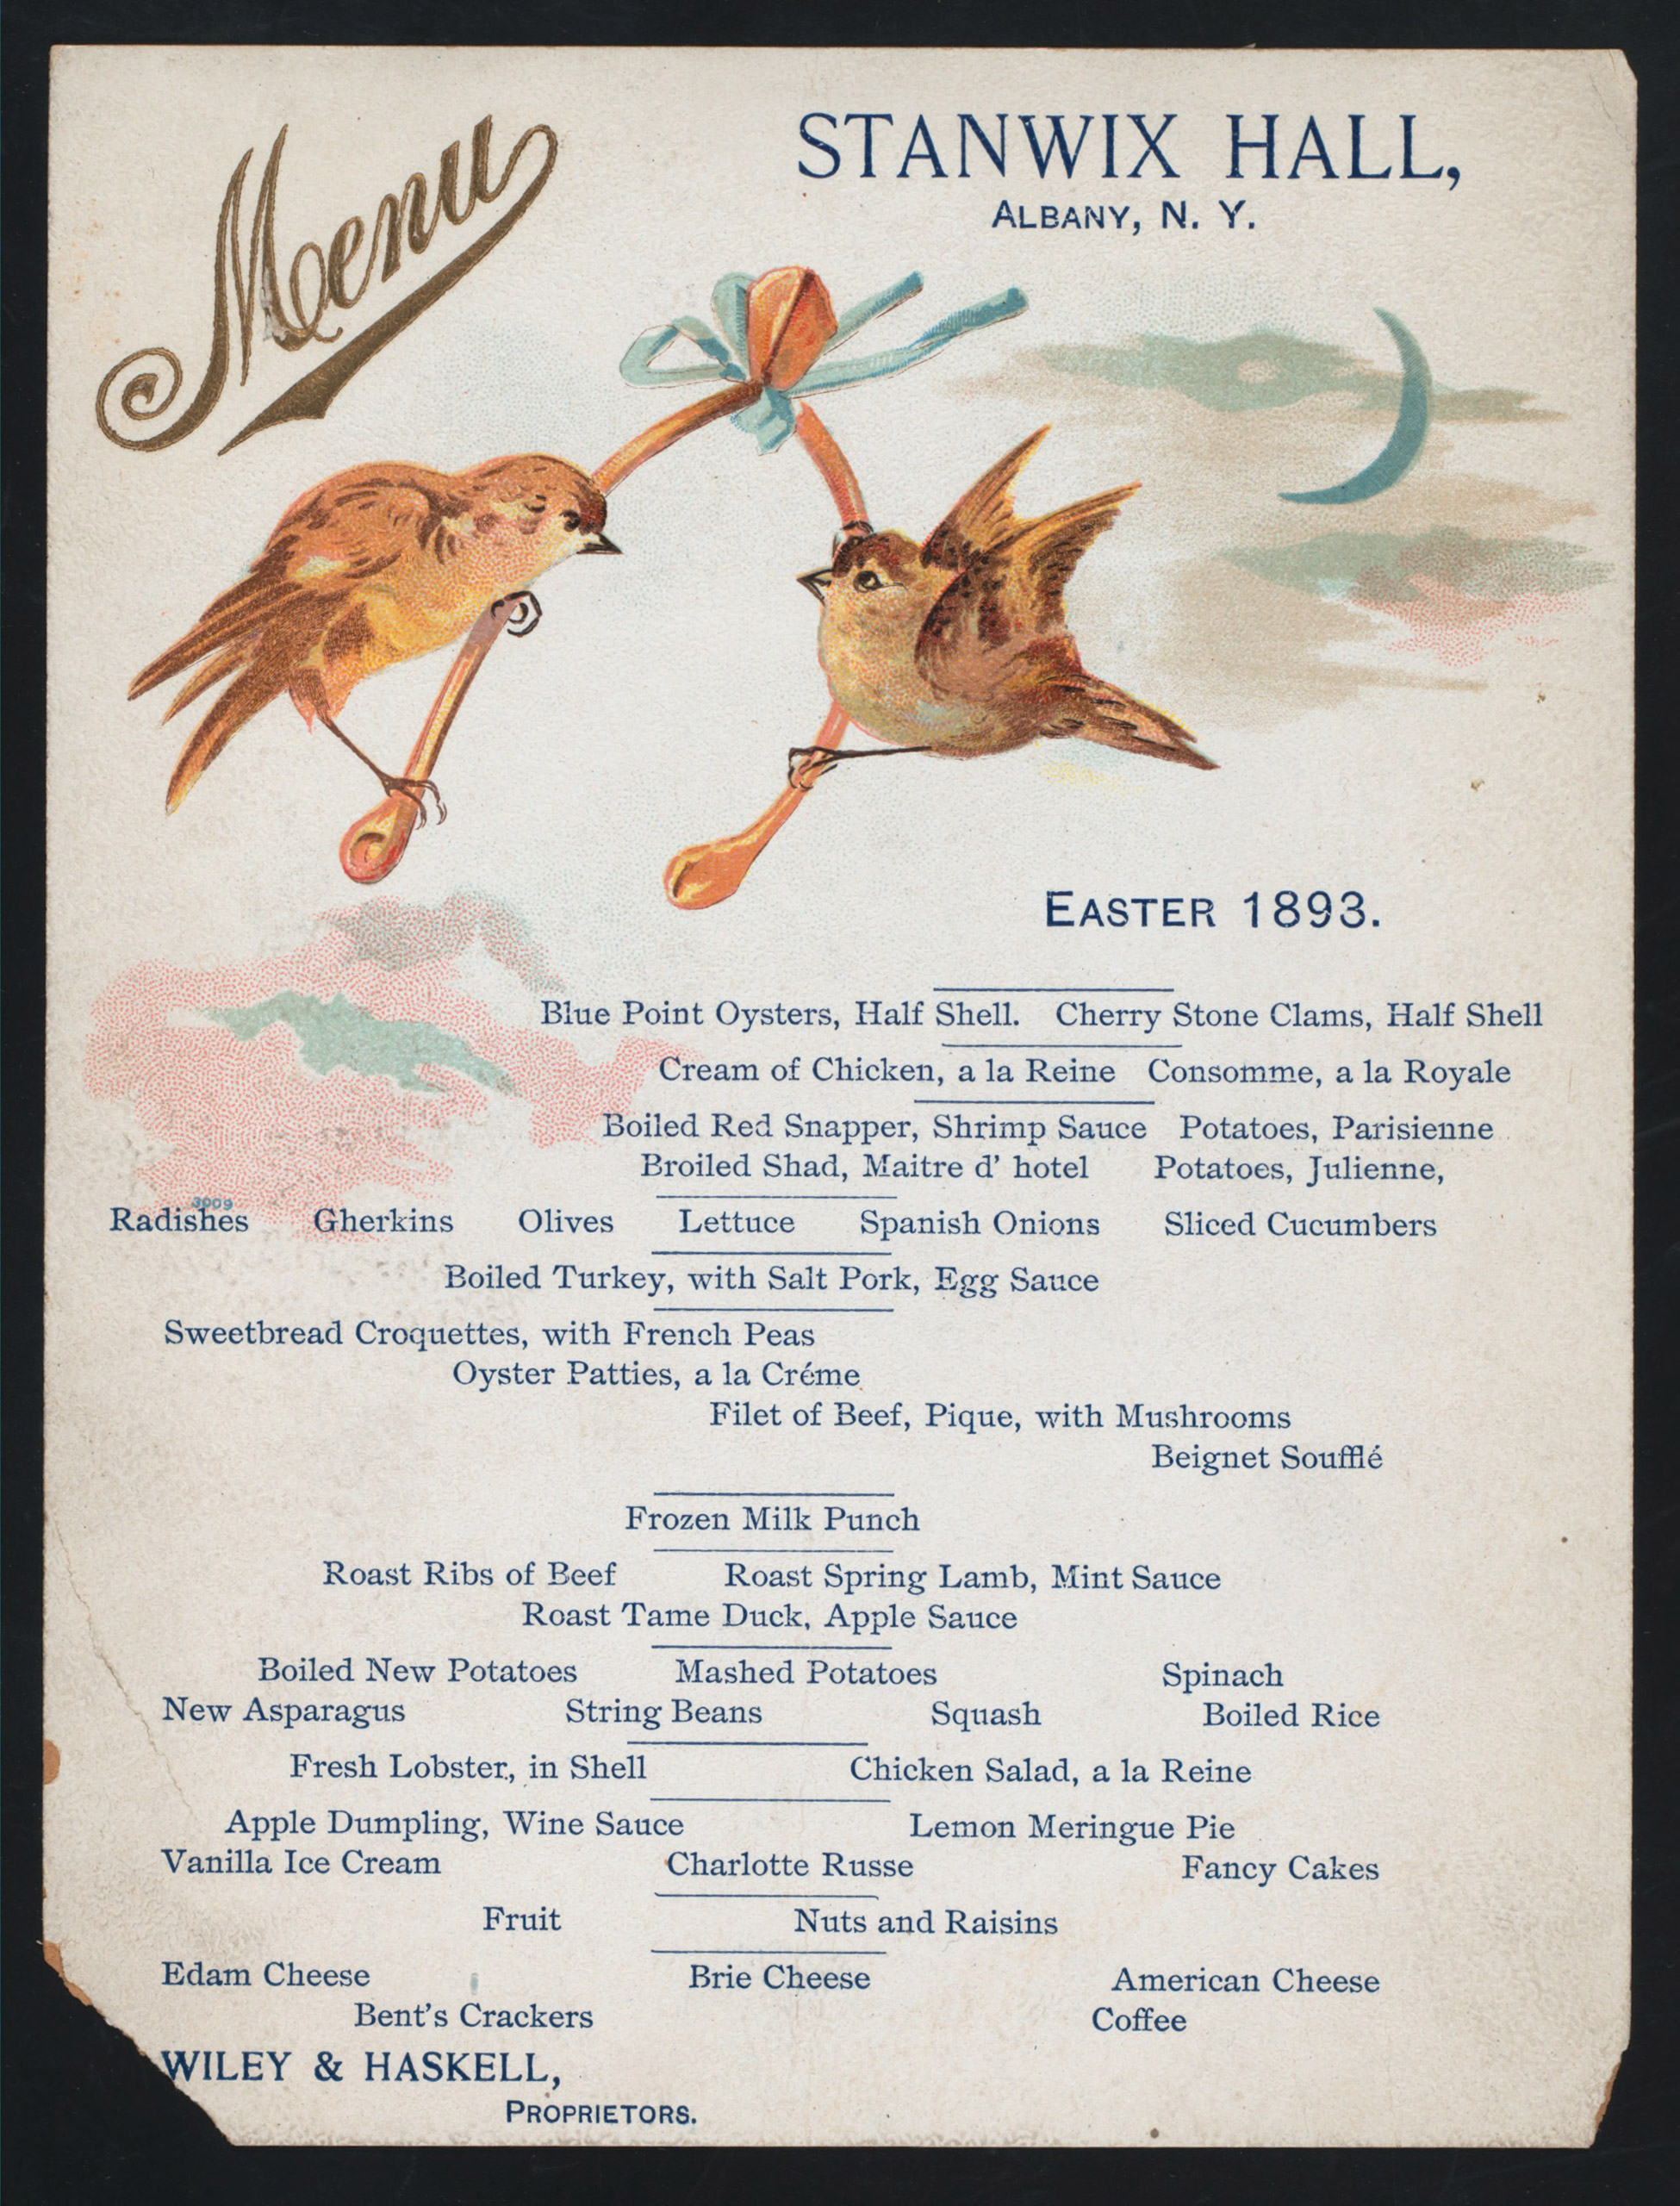 Easter dinner held by Wiley & Haskell at Stanwix Hall in Albany, NY. 1893. From the Buttolph collection of menus.